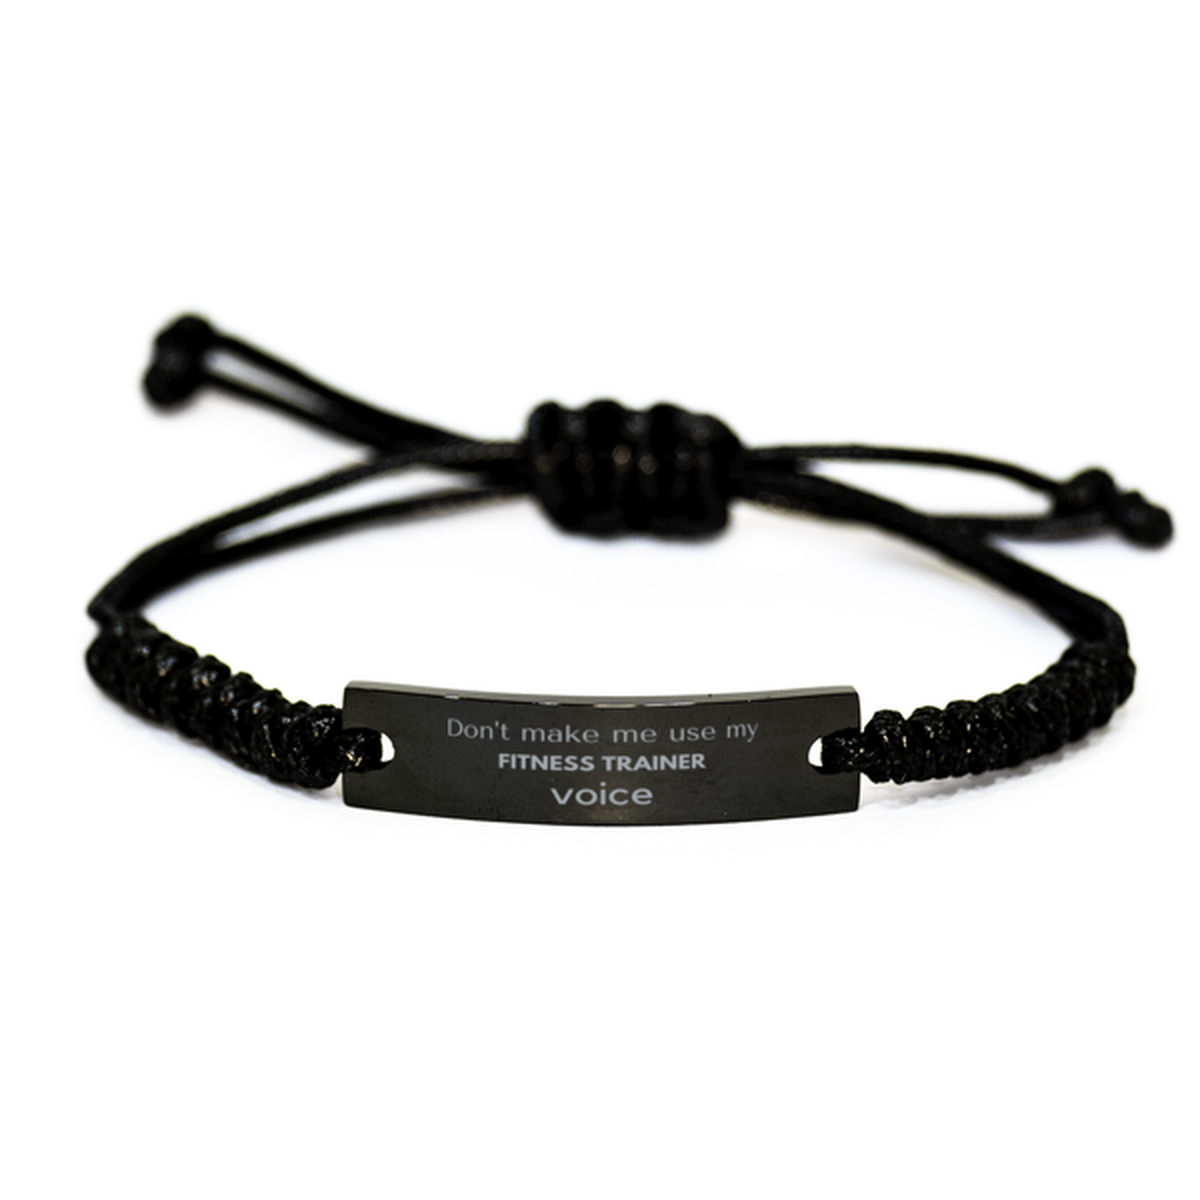 Don't make me use my Fitness Trainer voice, Sarcasm Fitness Trainer Gifts, Christmas Fitness Trainer Black Rope Bracelet Birthday Unique Gifts For Fitness Trainer Coworkers, Men, Women, Colleague, Friends